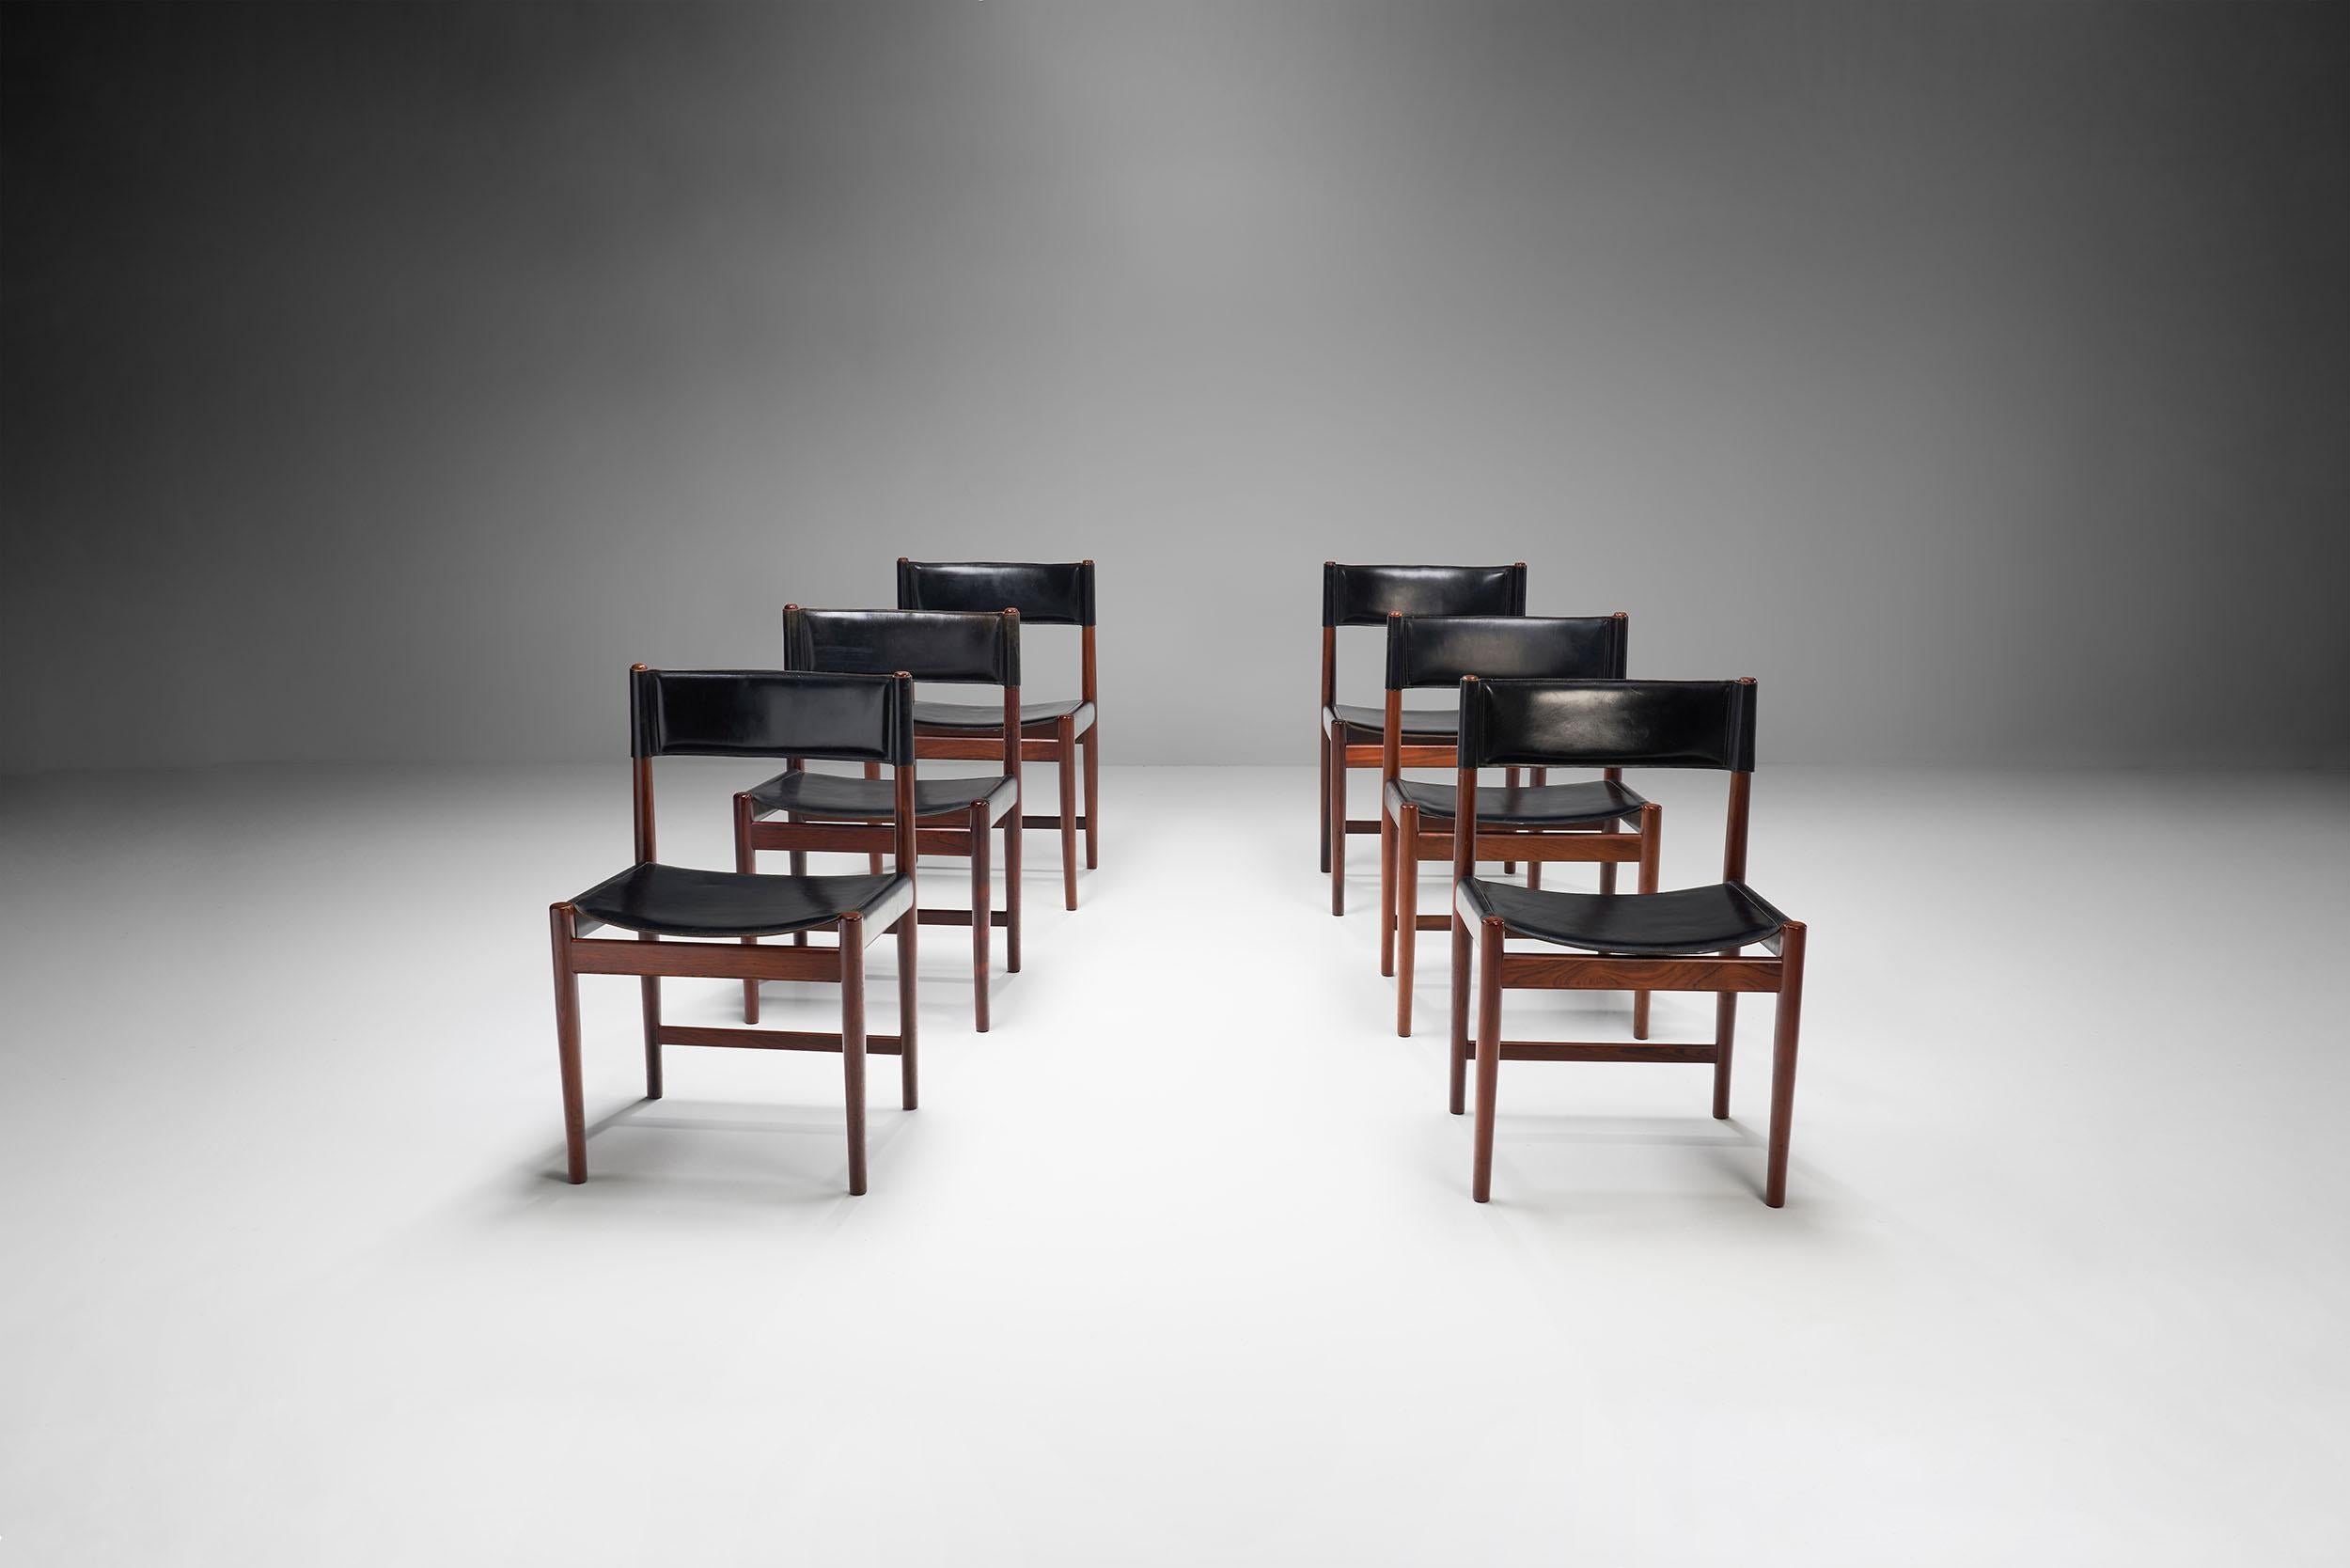 This set of six dining chairs by Danish designer Kurt Østervig is a beautiful example of simple, refined mid-century Danish design.

The black leather chairs are made of solid dark wood. The deep colour of the wood and the upholstery create an